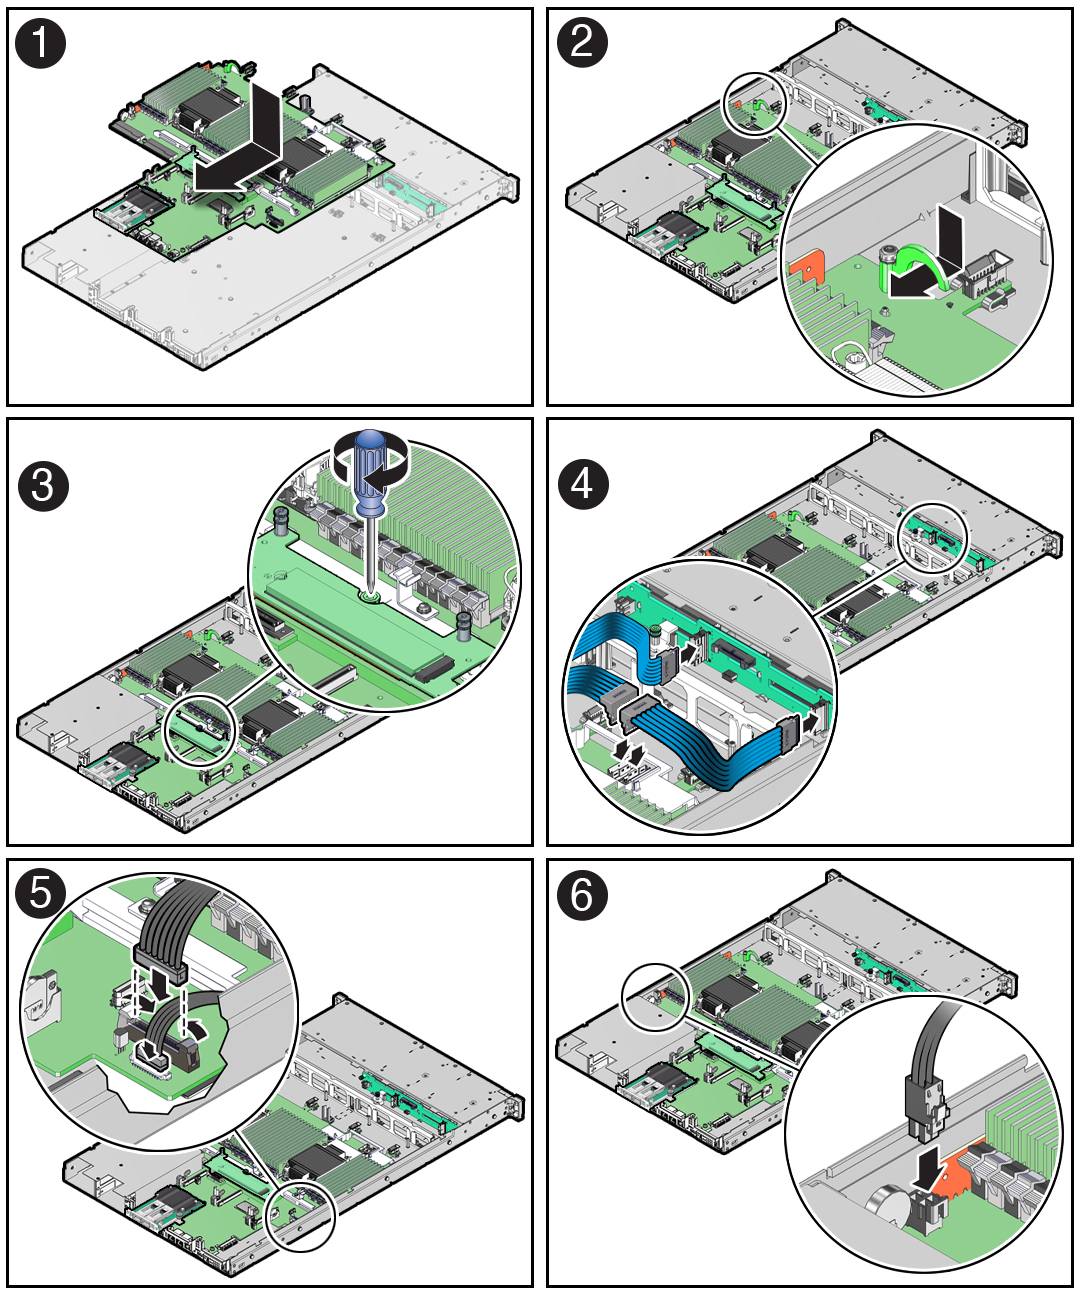 Figure showing how to install the motherboard in to the server.